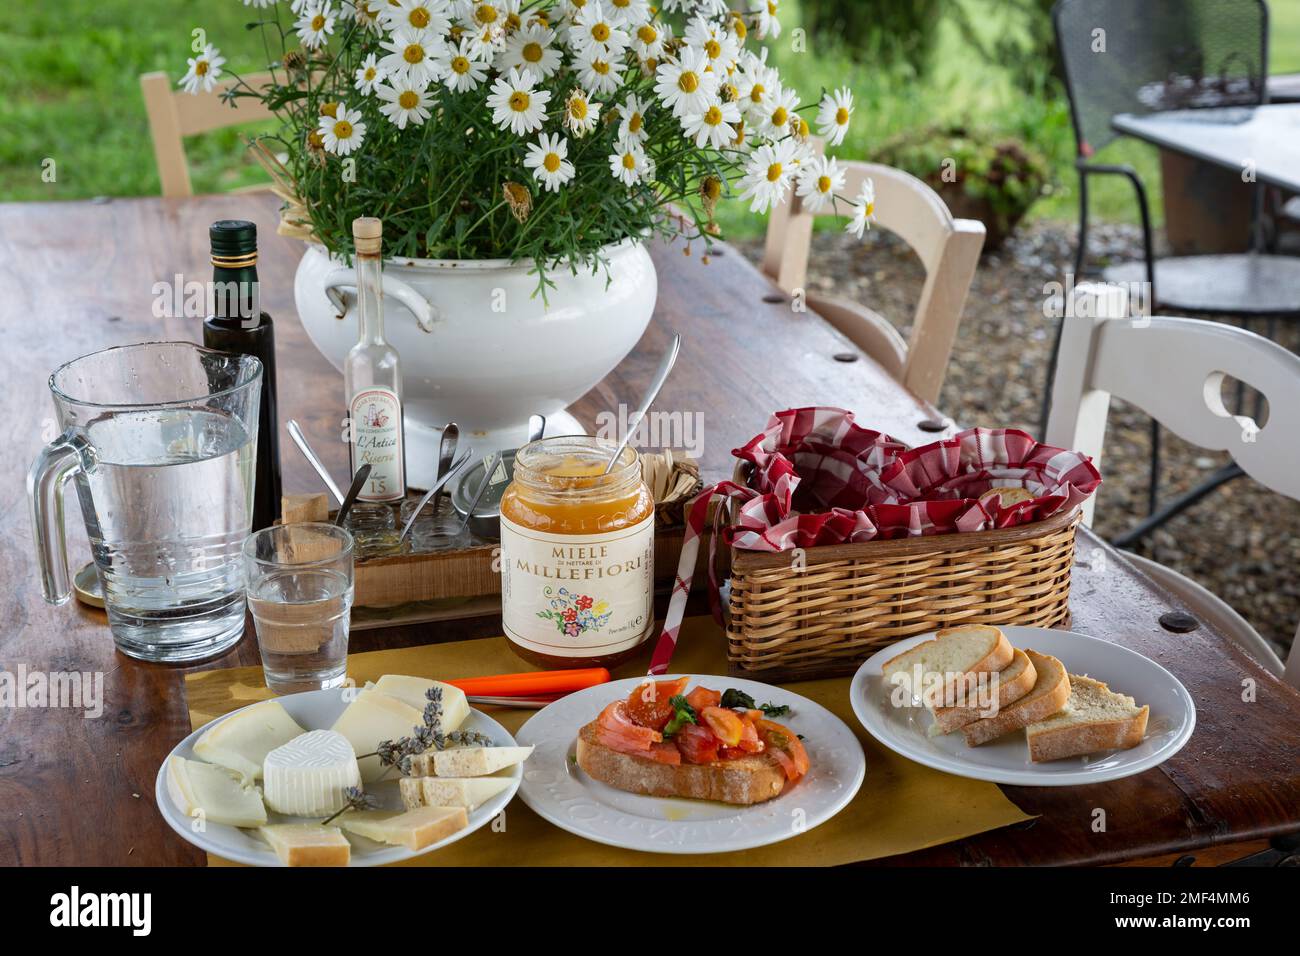 Taste testing a variety of goat and pecorino cheeses, paired with honey, at cheese farm in Tuscany, Italy. Stock Photo